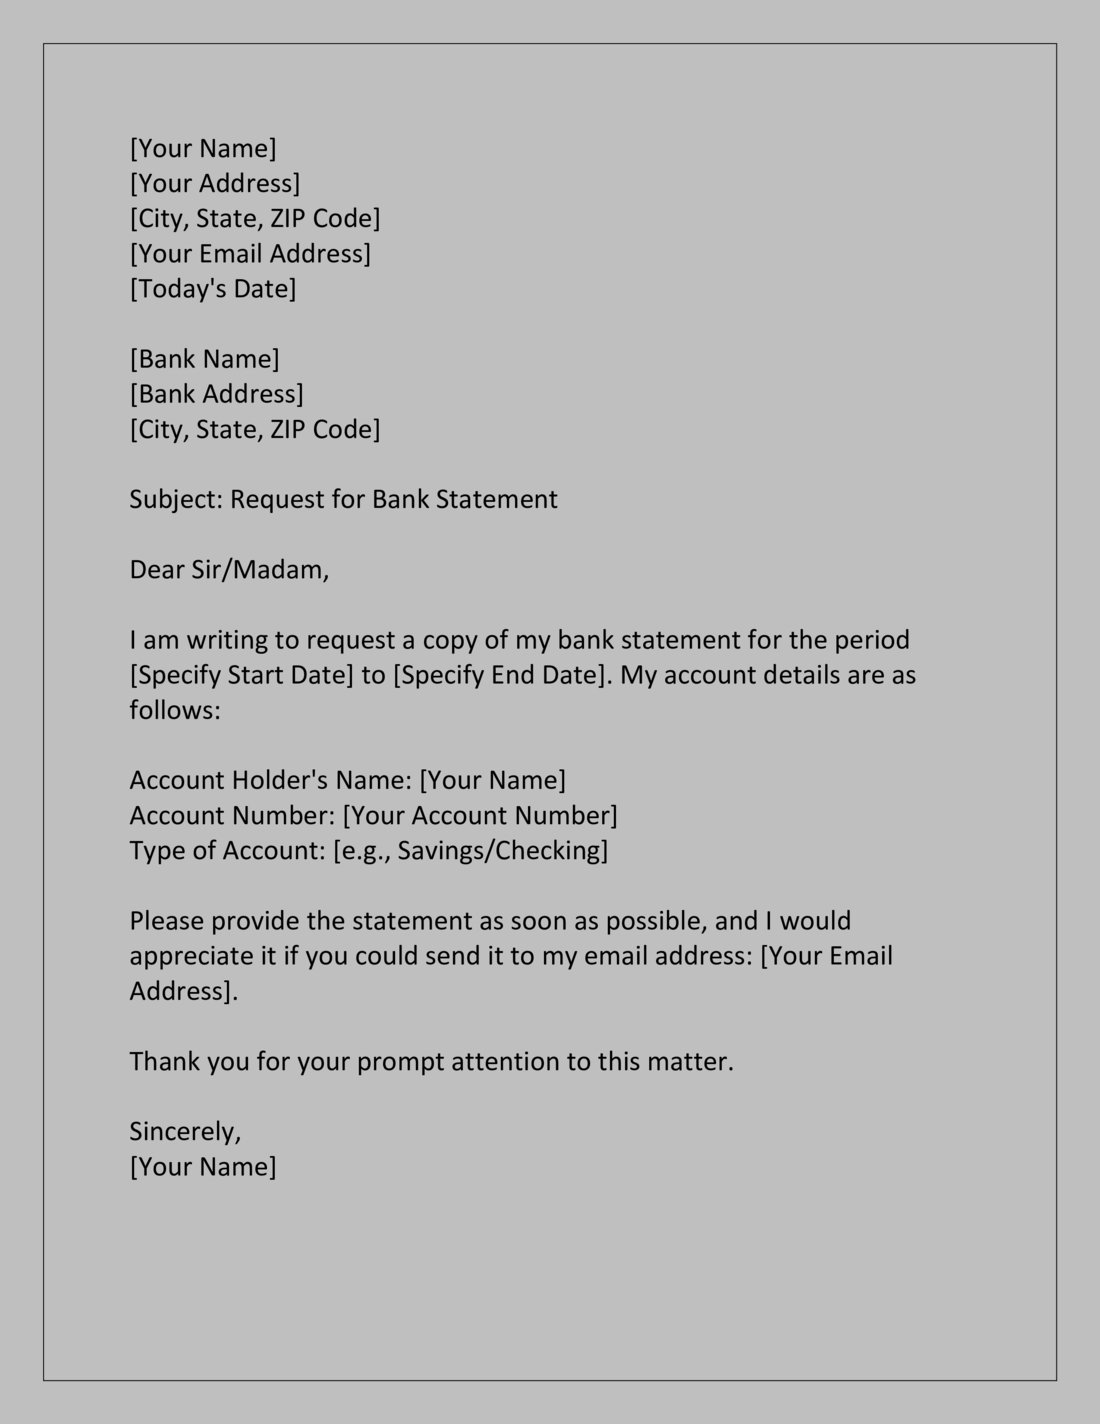 Basic Bank Statement Request Letter